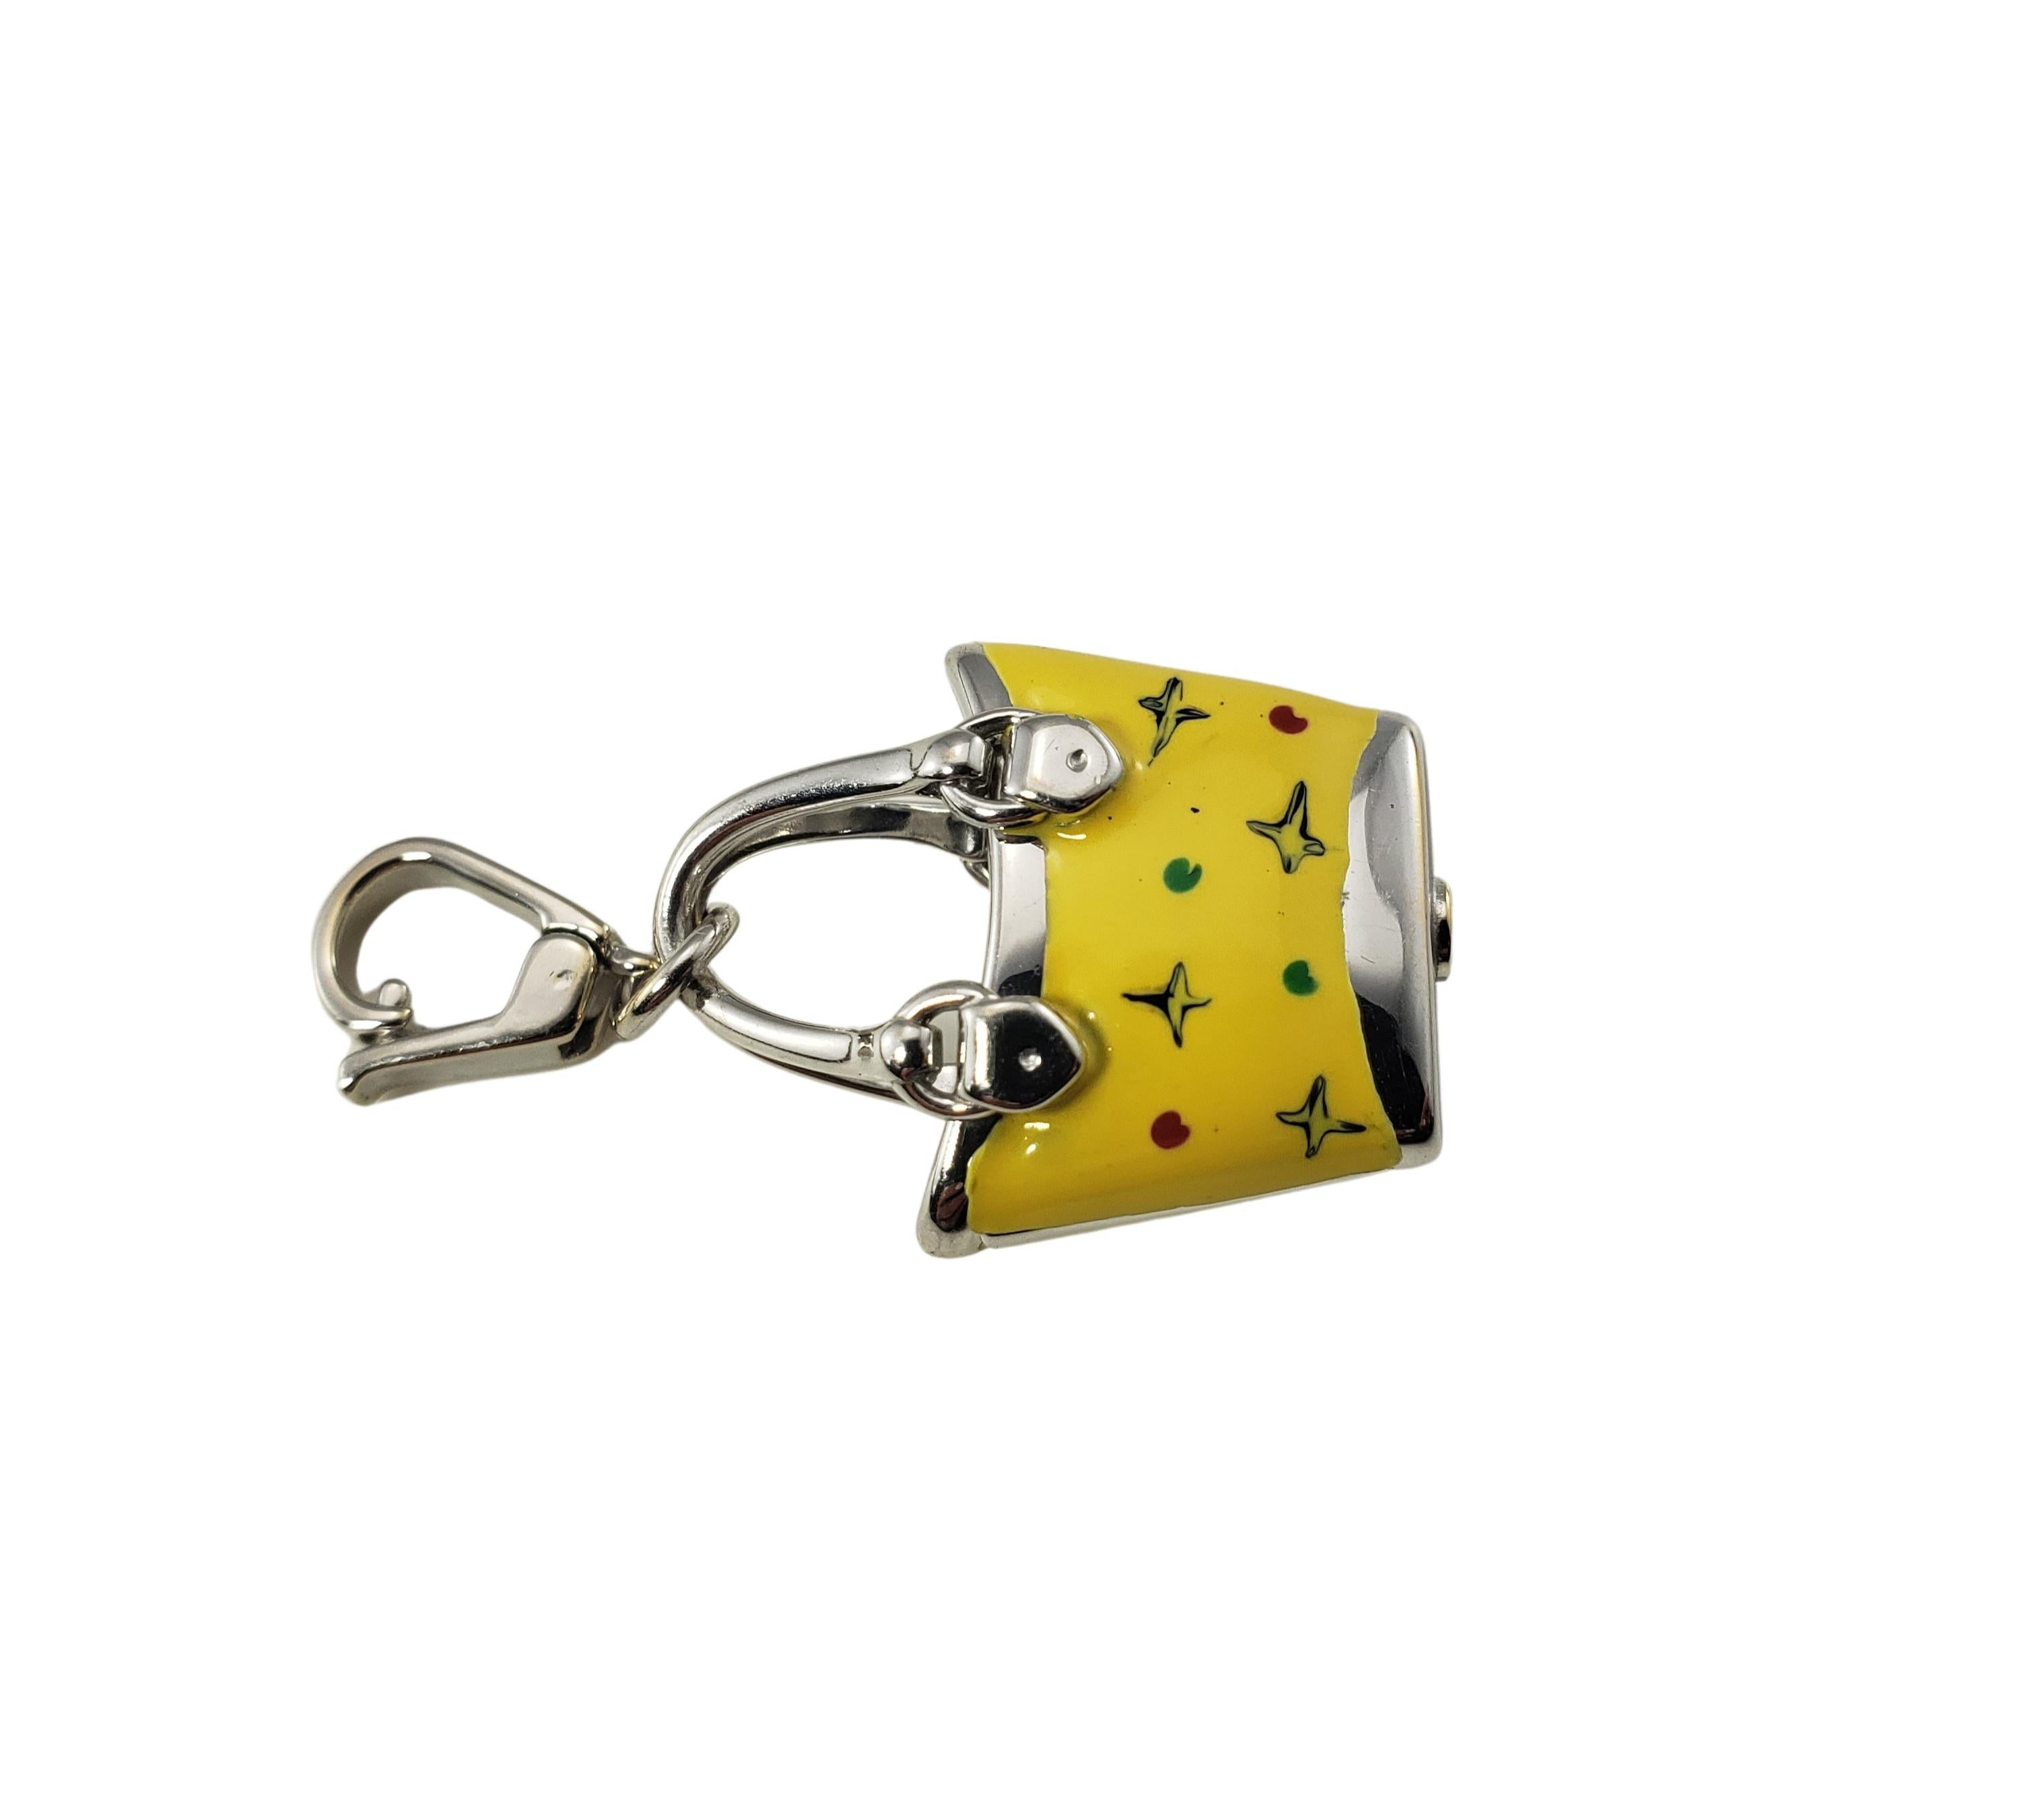 Vintage 18 Karat White Gold and Enamel Handbag Charm-

For the fashionista in your life!

This lovely 3D charm features a miniature handbag crafted in 18K white gold and decorated with colorful yellow enamel.

Size: 23 mm x 18 mm

Weight:  2.8 dwt.